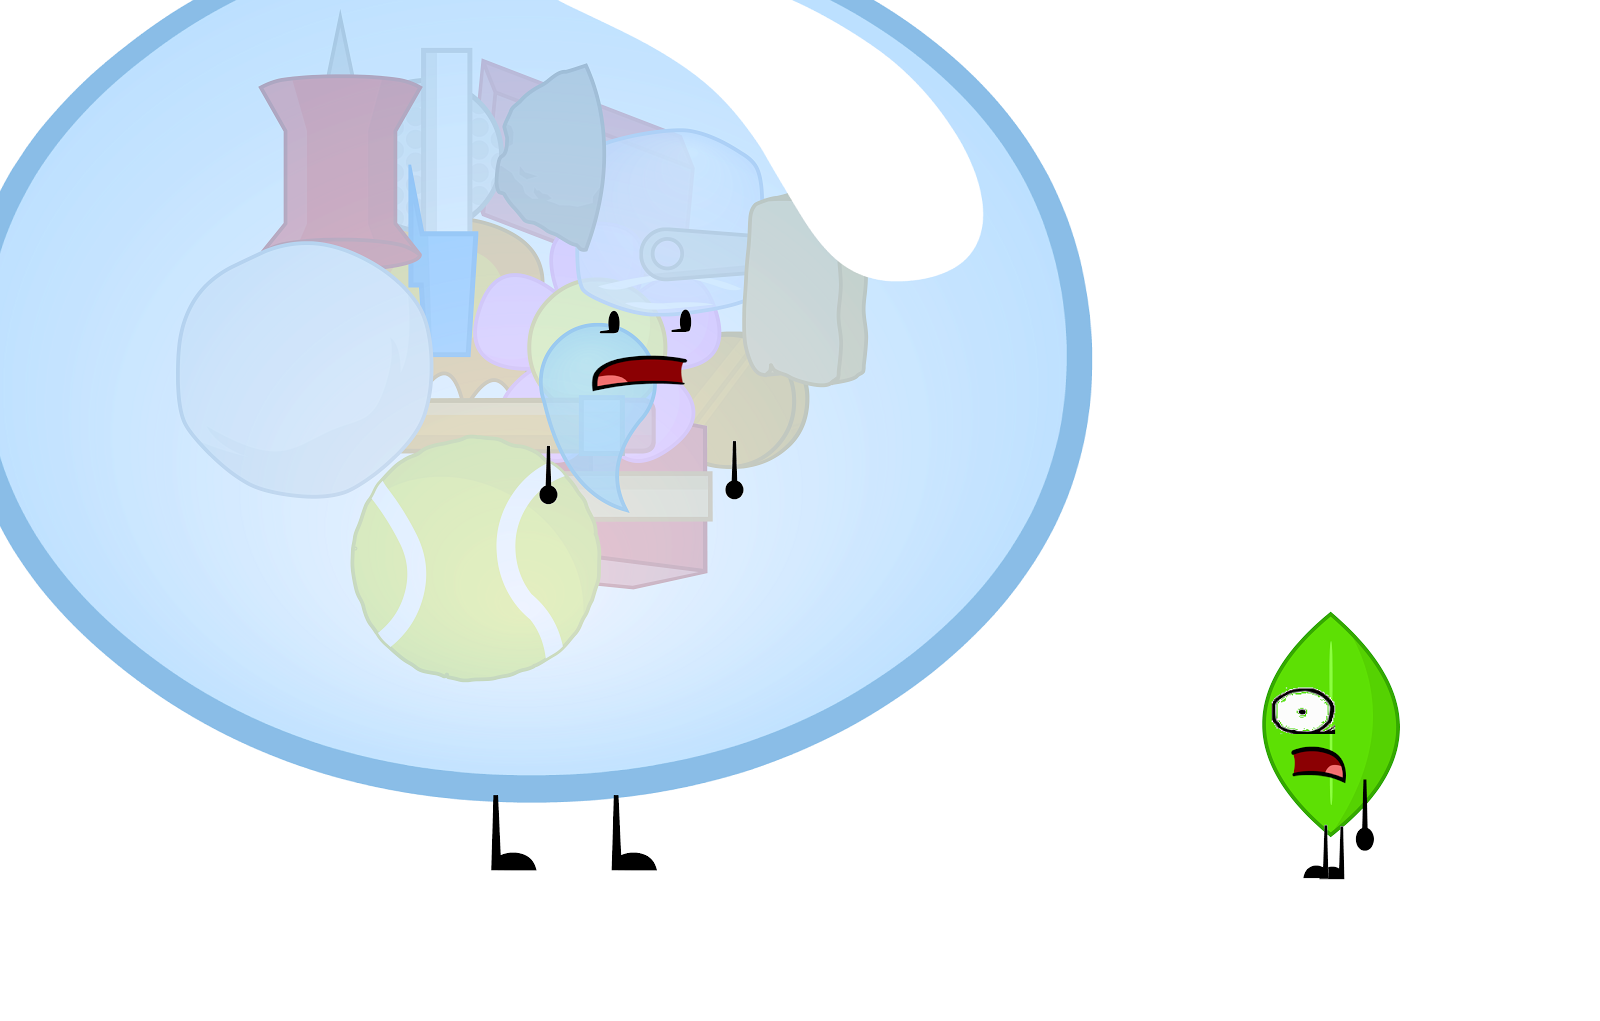 Bfdi Old Assets.